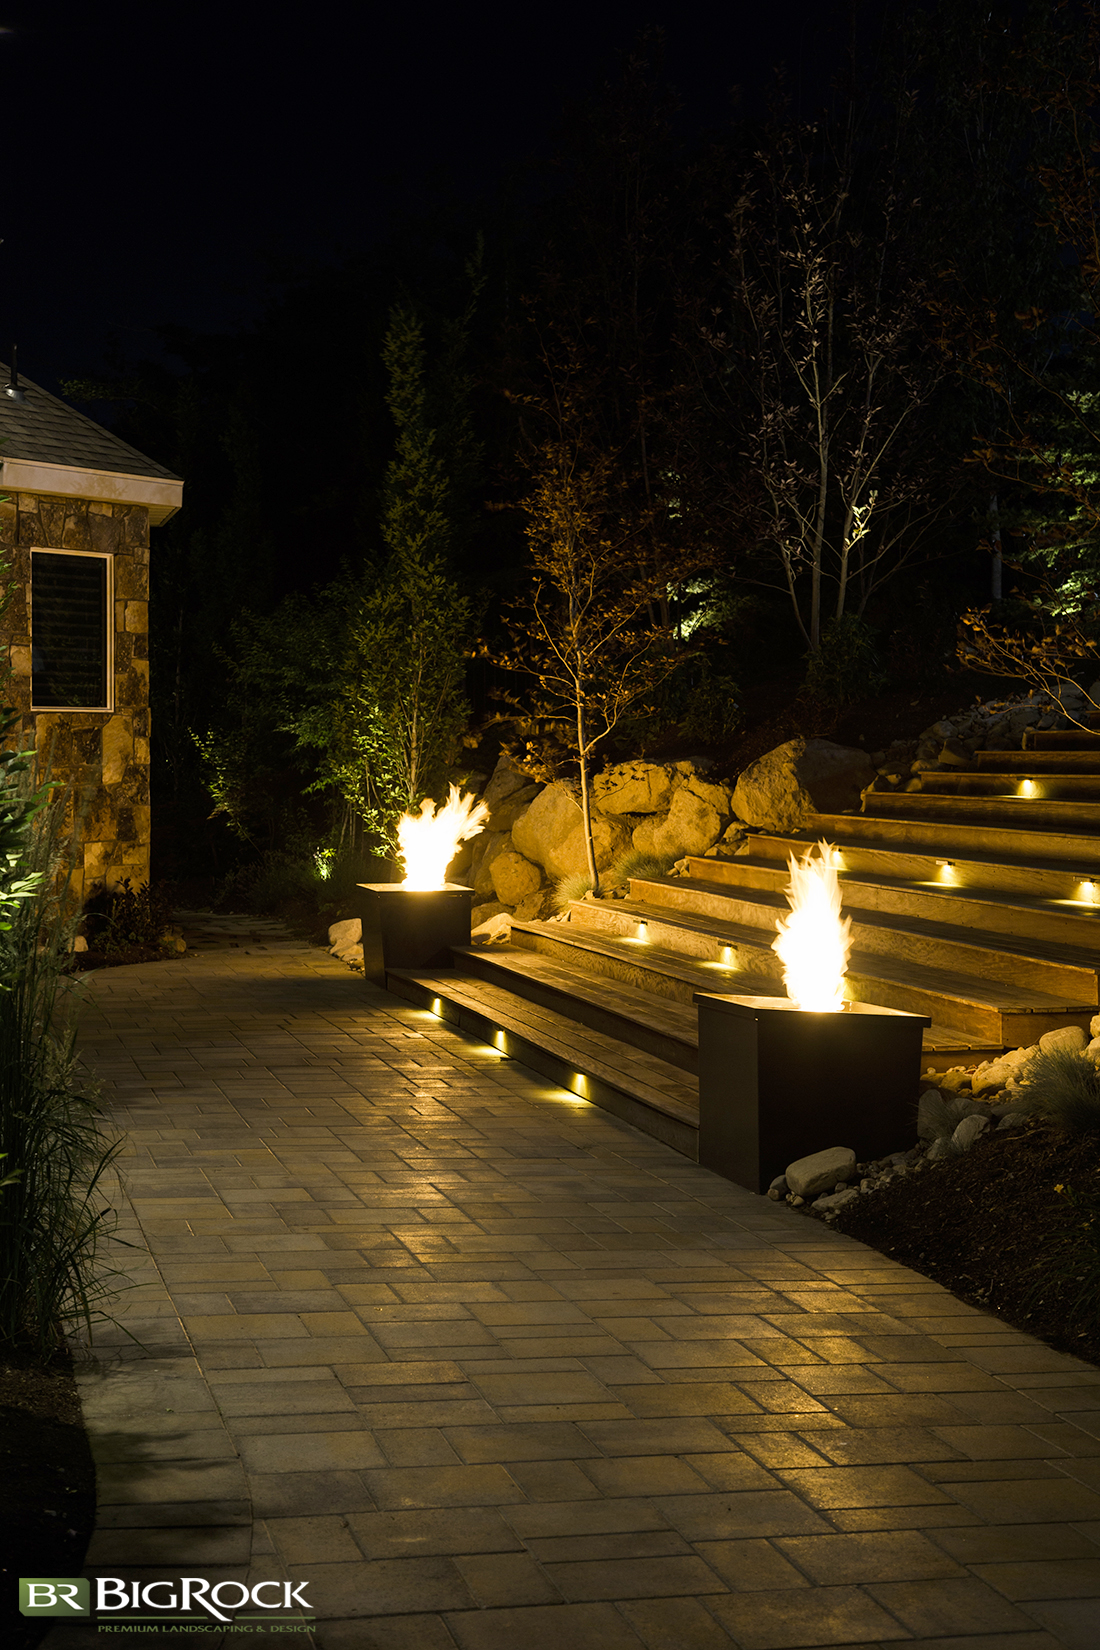 Big Rock Landscaping consider every element of a landscape design for our clients. We help elevate your landscape with jaw dropping lighting options and fire features.